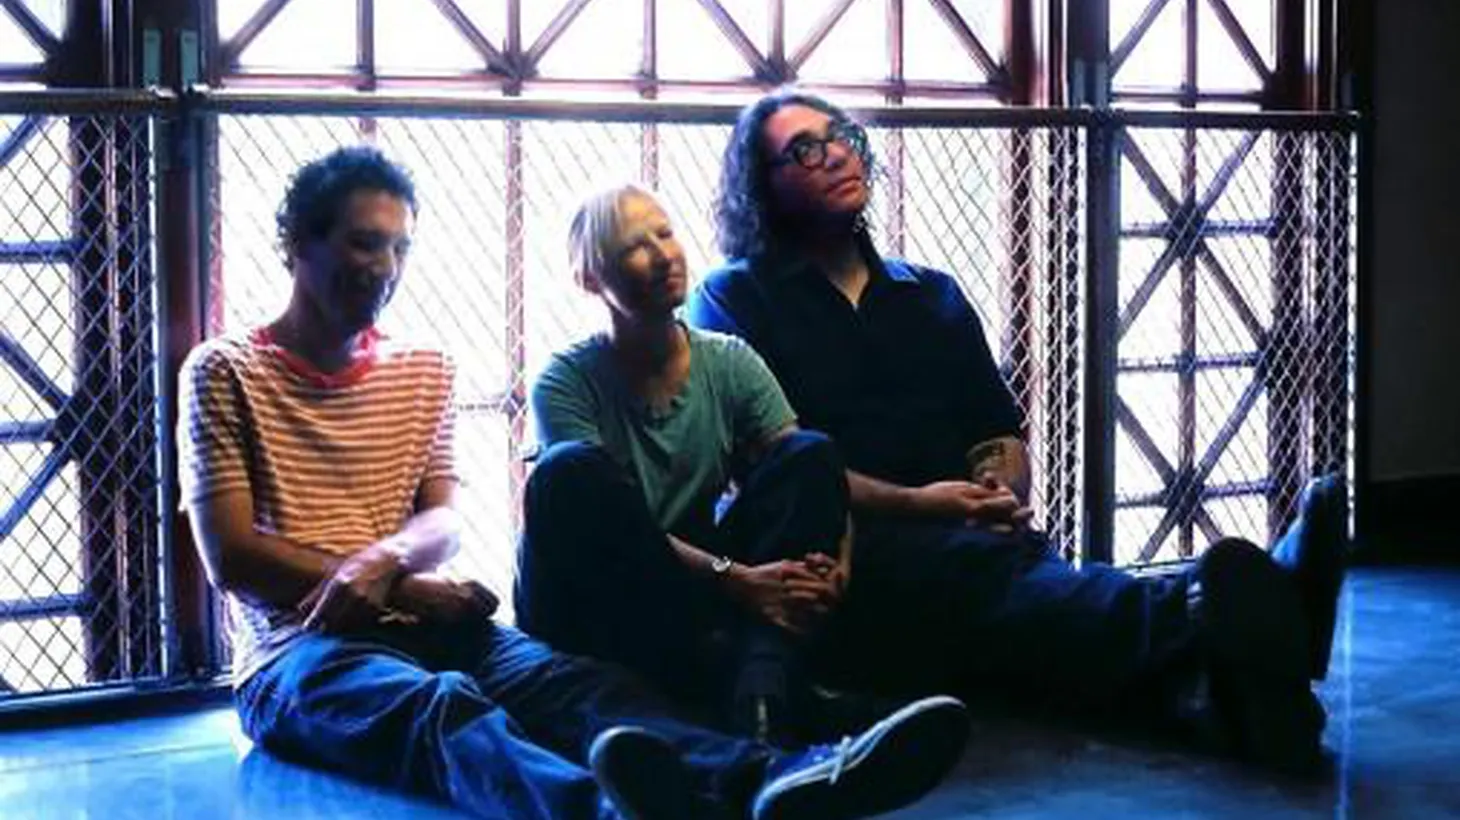 New Jersey trio Yo La Tengo have been making music together for a long time and their 13th recording is easily among their best.